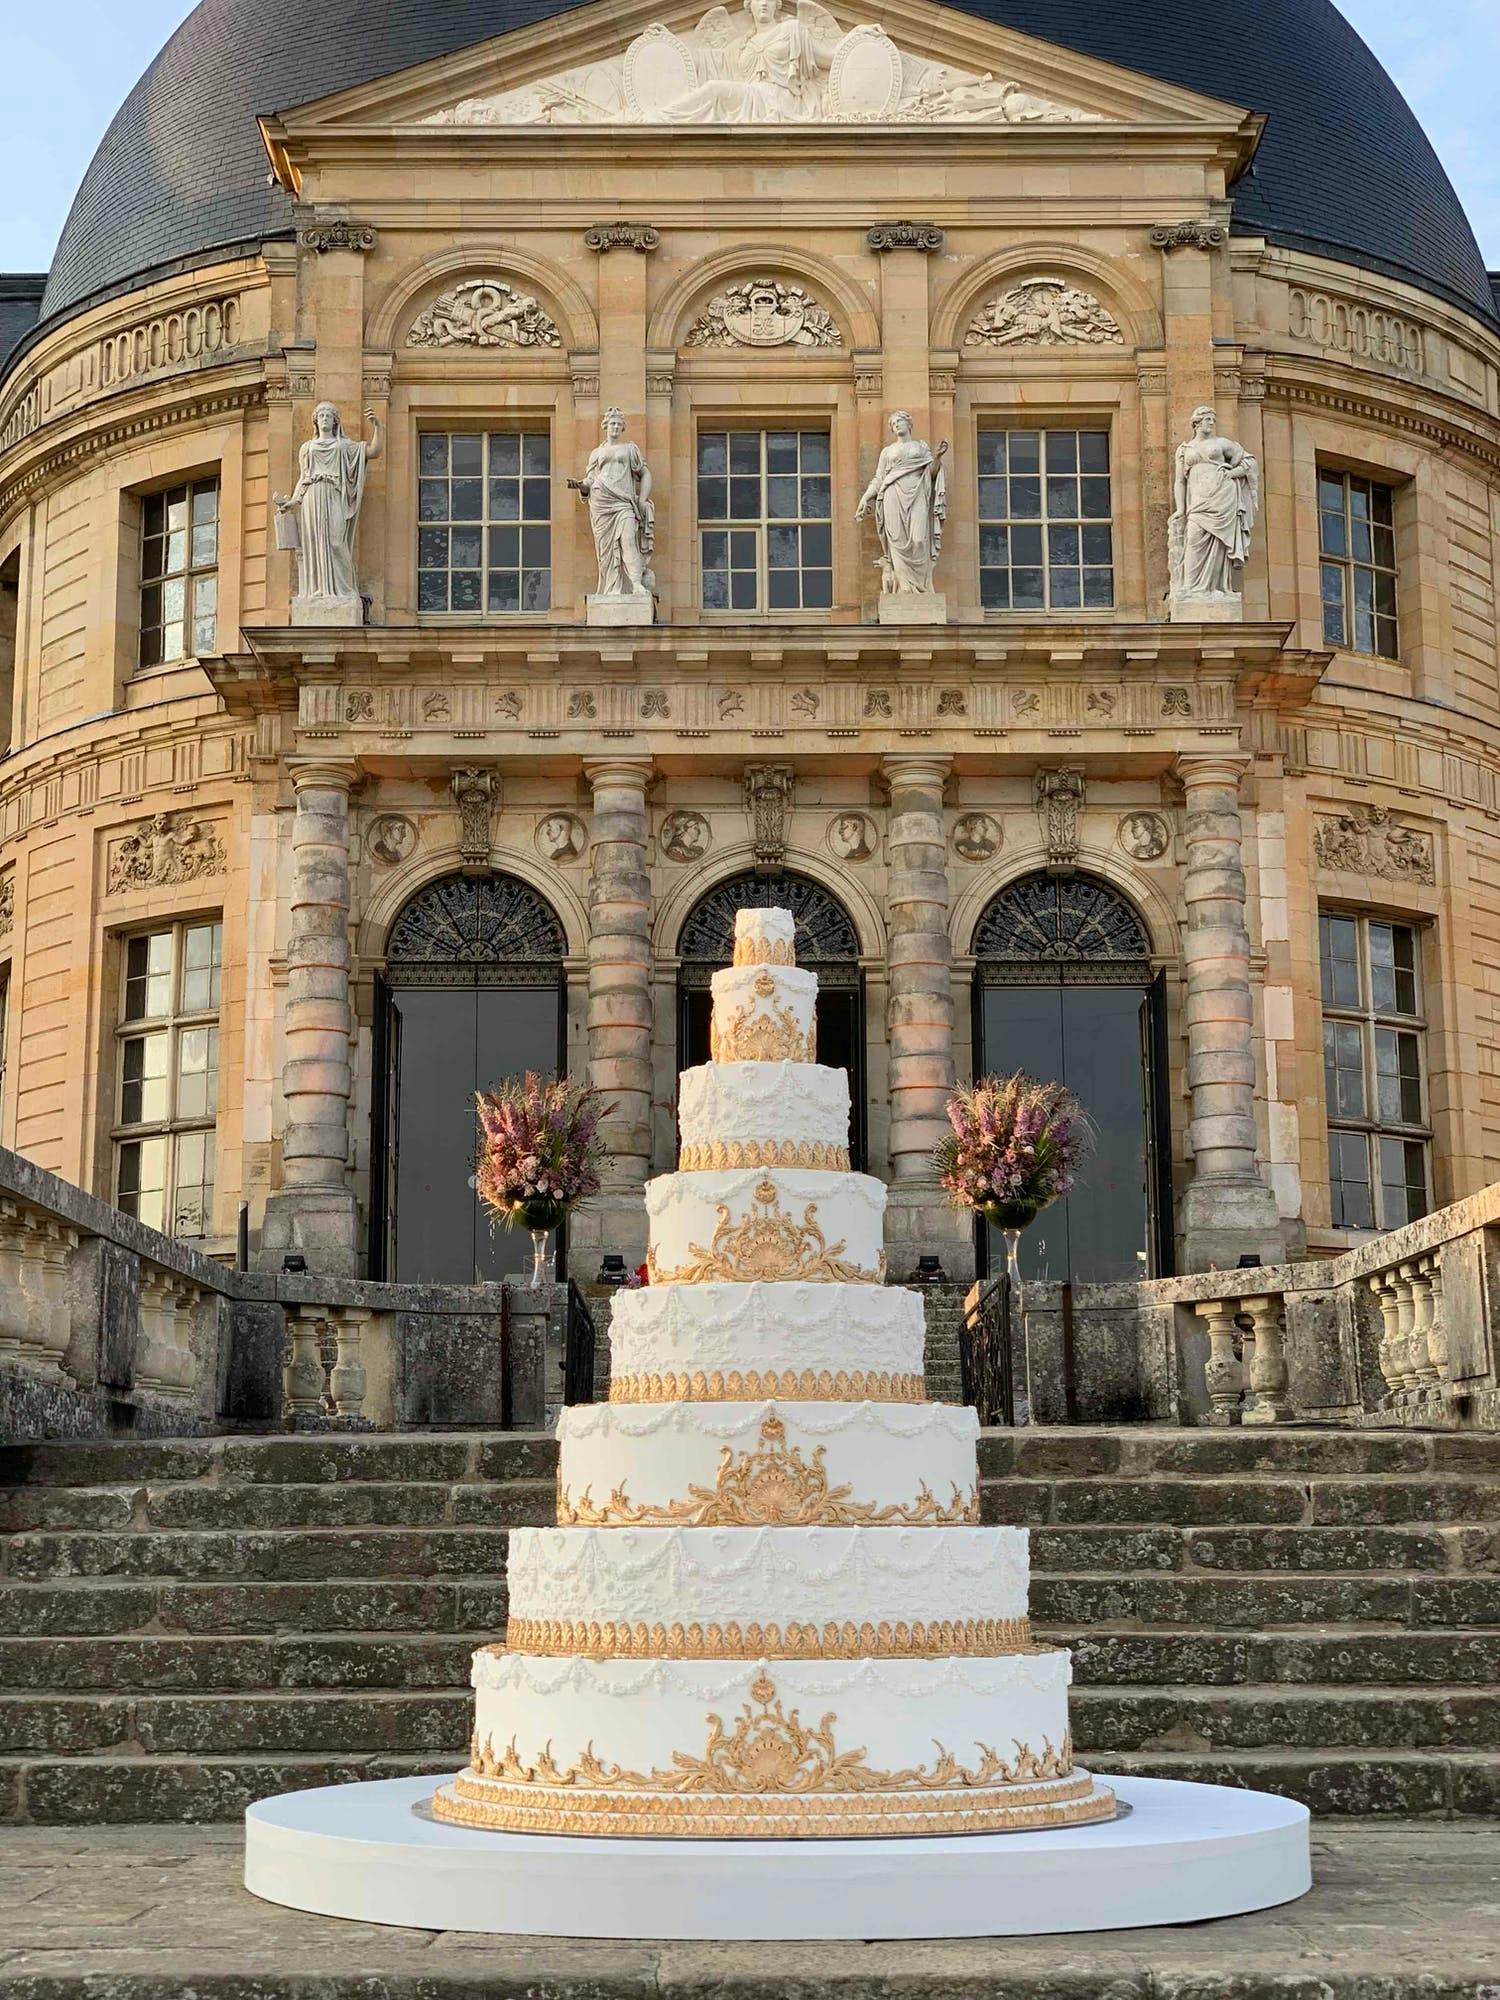 Towering eight tier white wedding cake with ornate gold icing designs | PartySlate